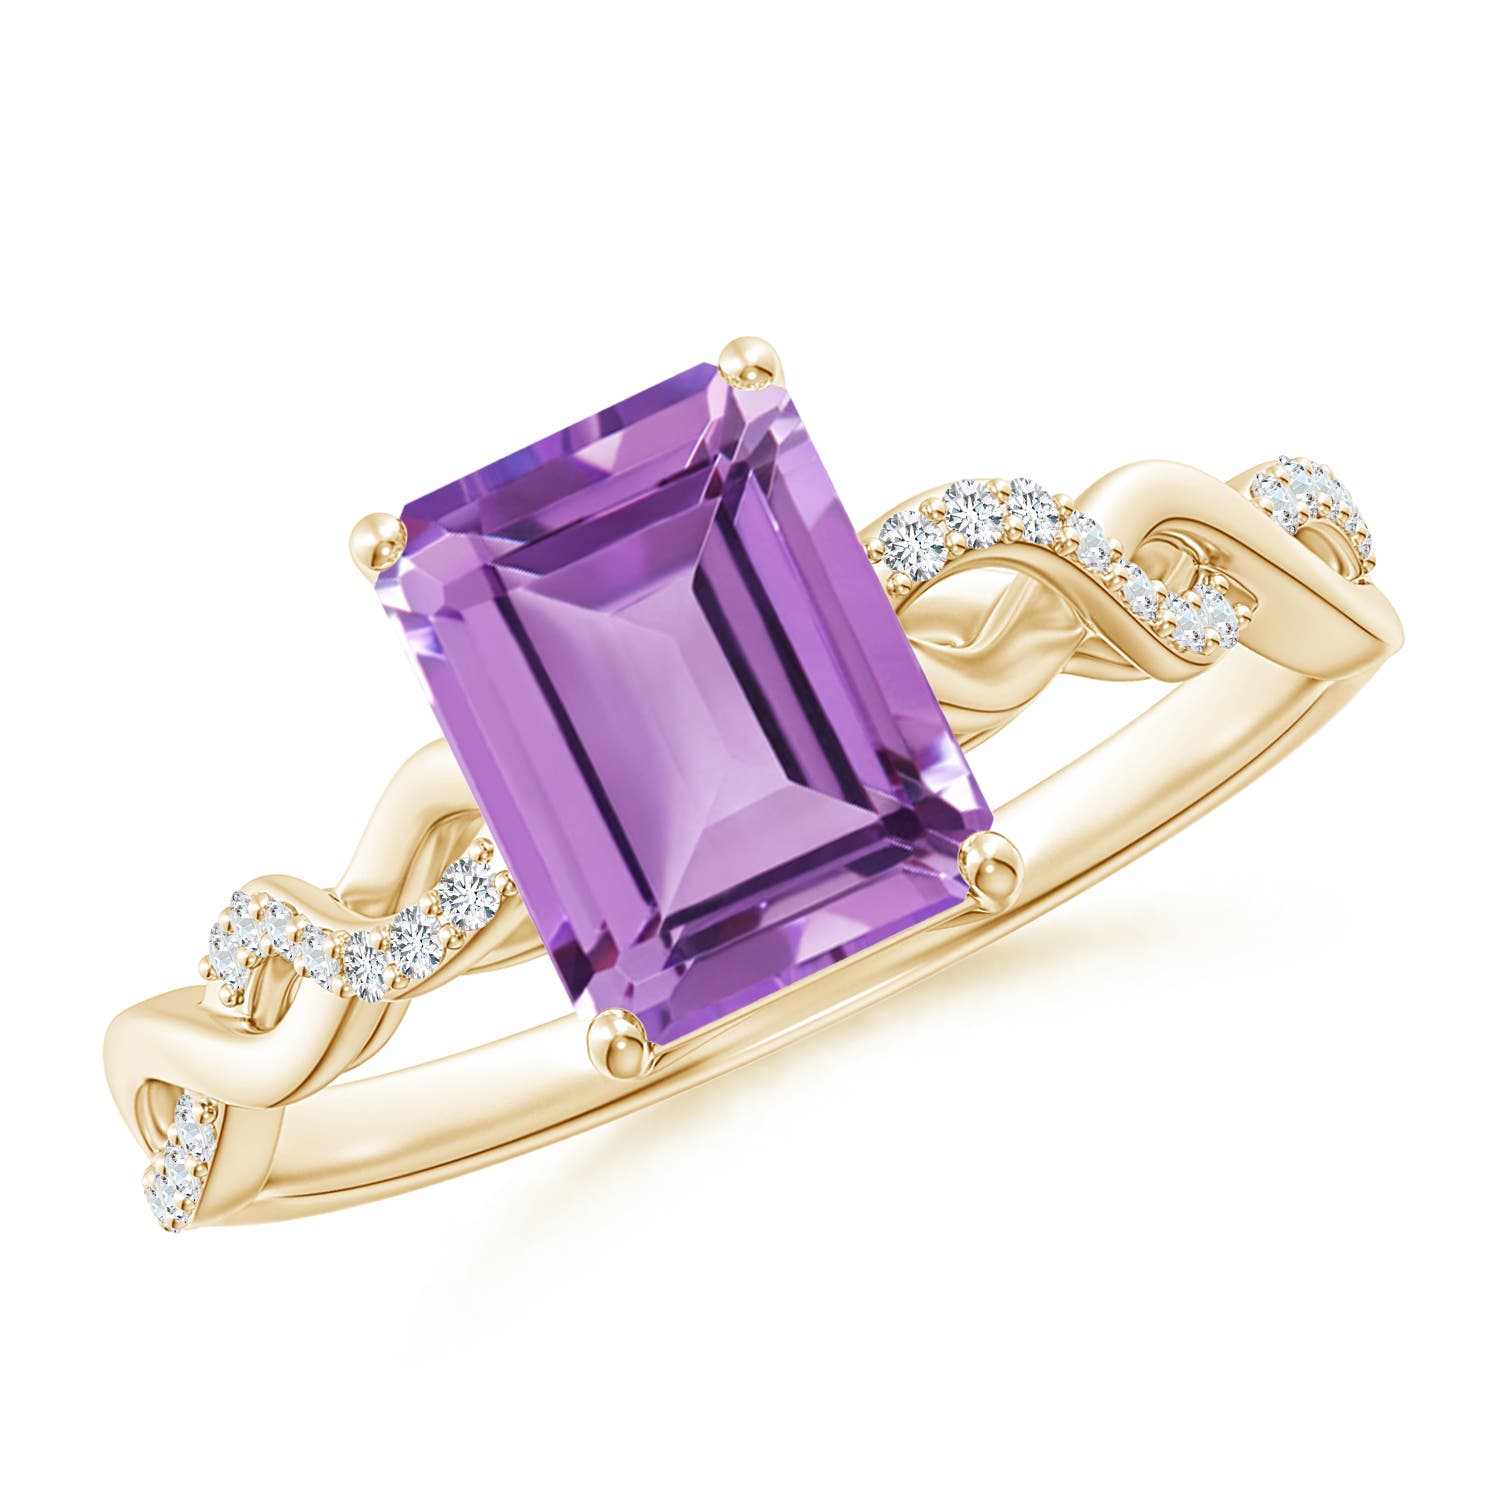 A - Amethyst / 1.63 CT / 14 KT Yellow Gold